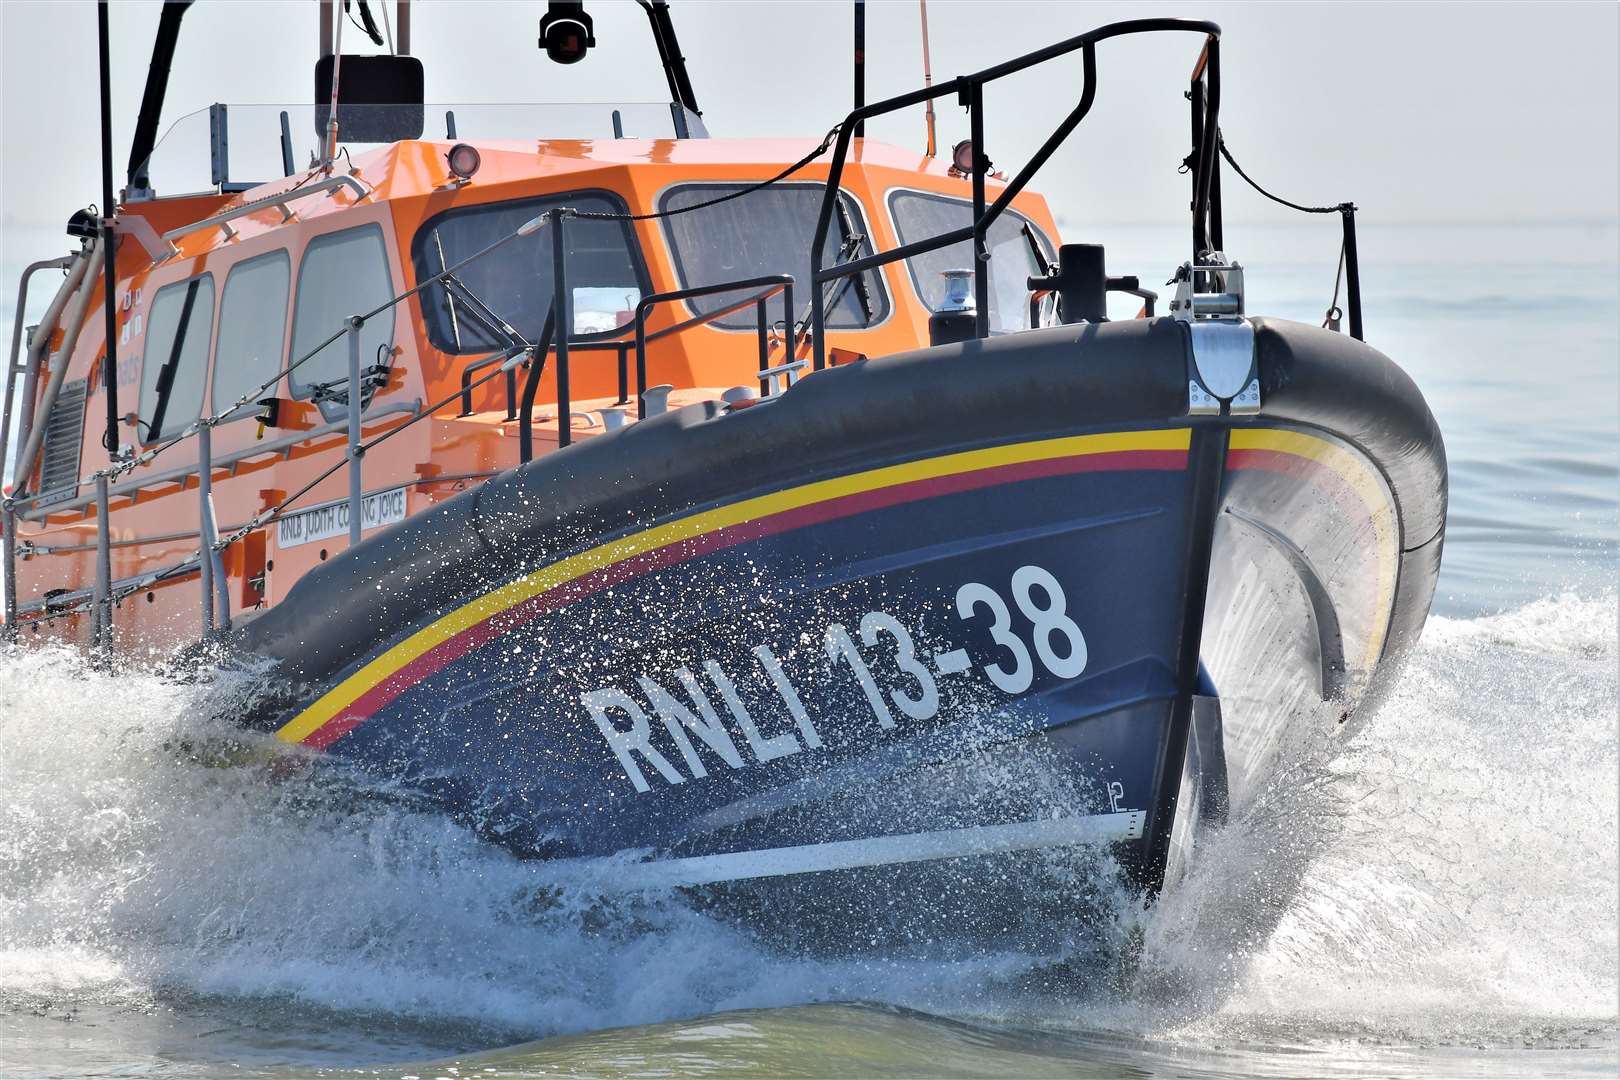 The new £2.2m Shannon-class lifeboat Judith Copping Joyce is taking over at the RNLI station at Sheerness, Sheppey. Picture: RNLI/Vic Booth